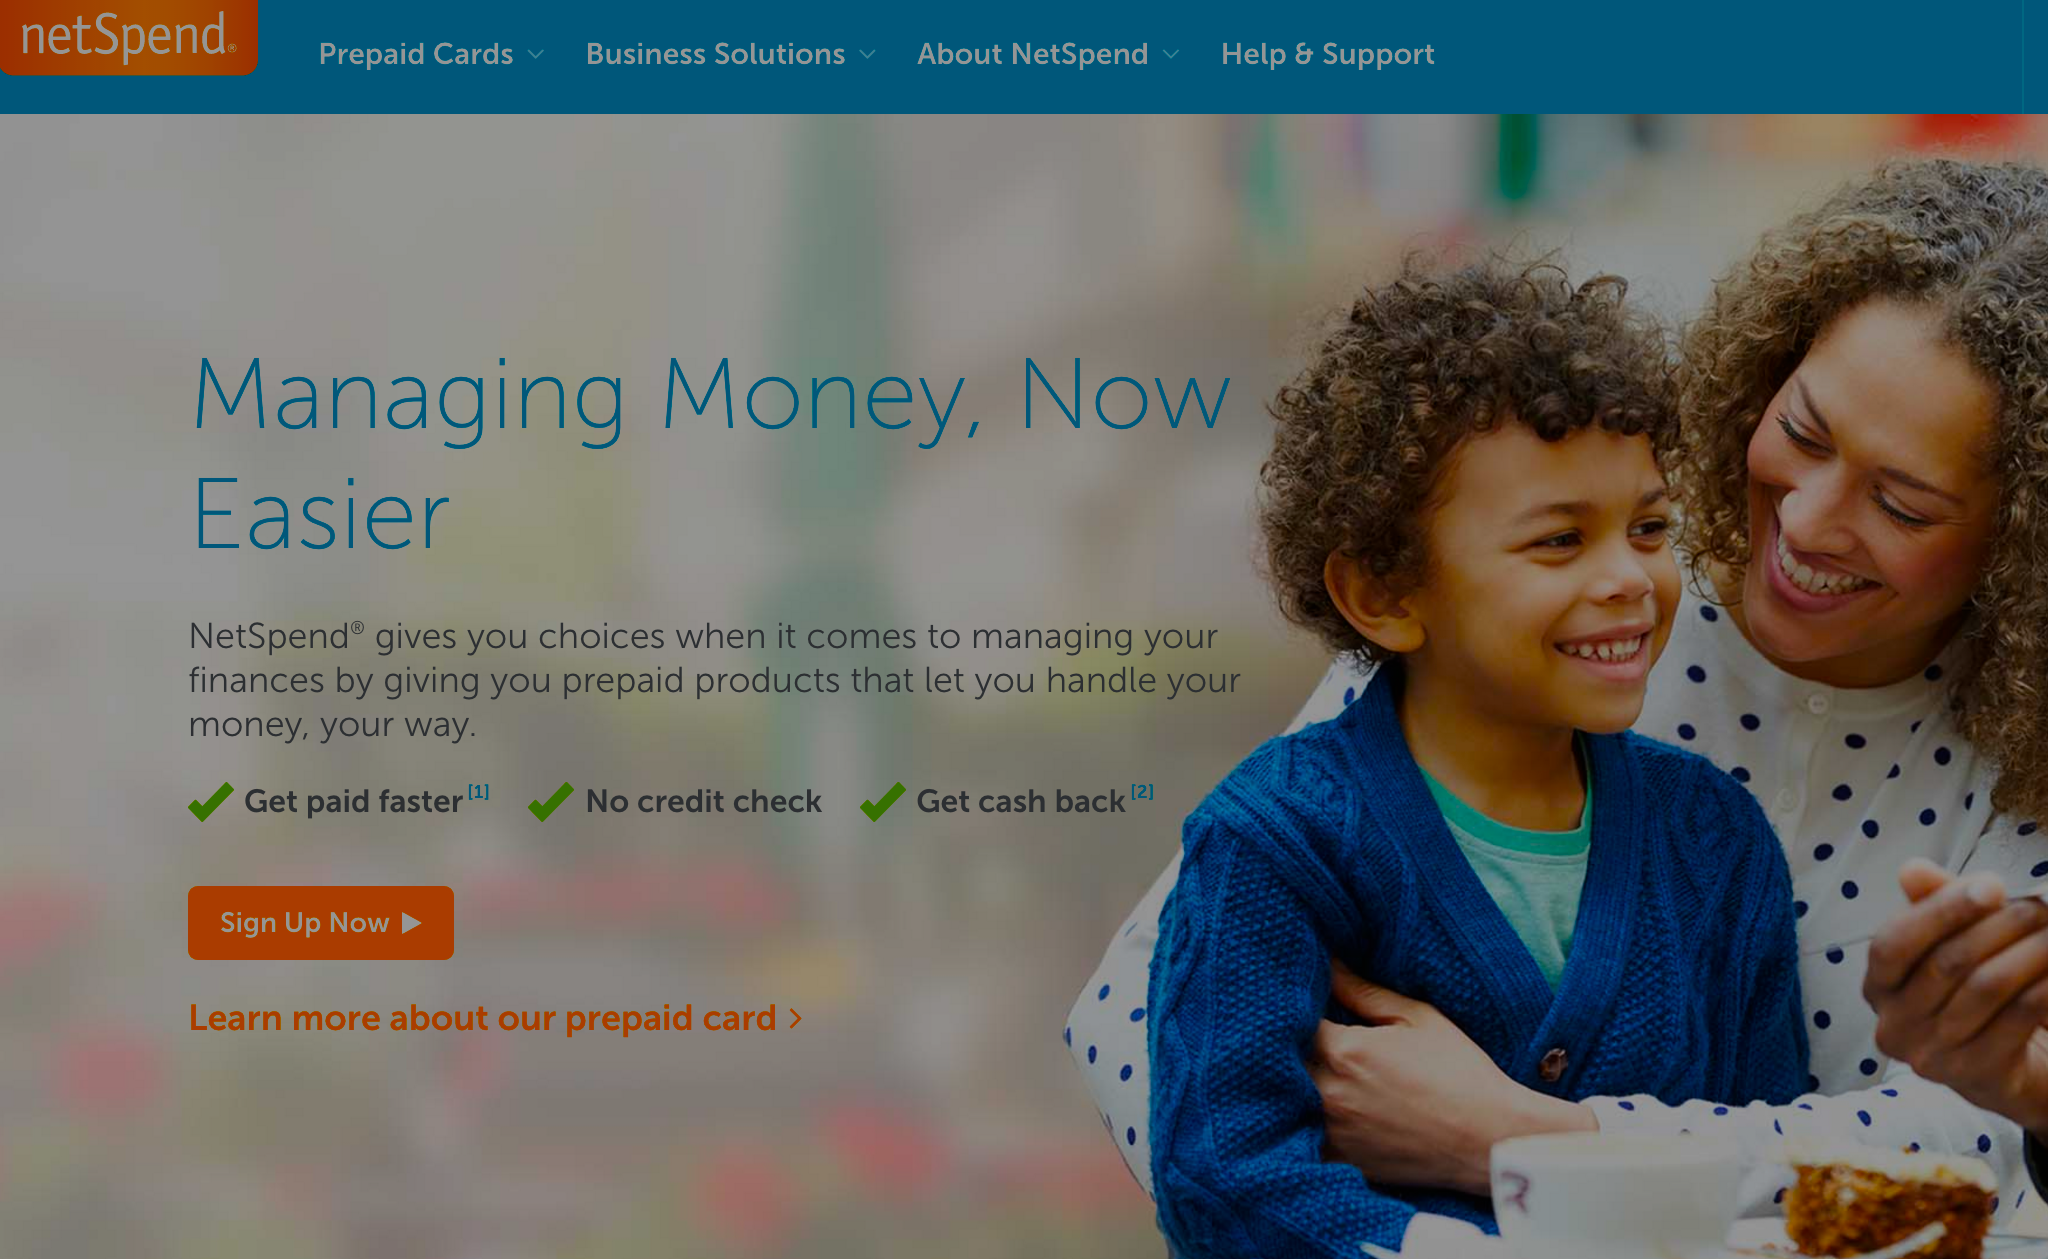 Feds Accuse NetSpend Of Misleading Customers About Prepaid Debit Cards